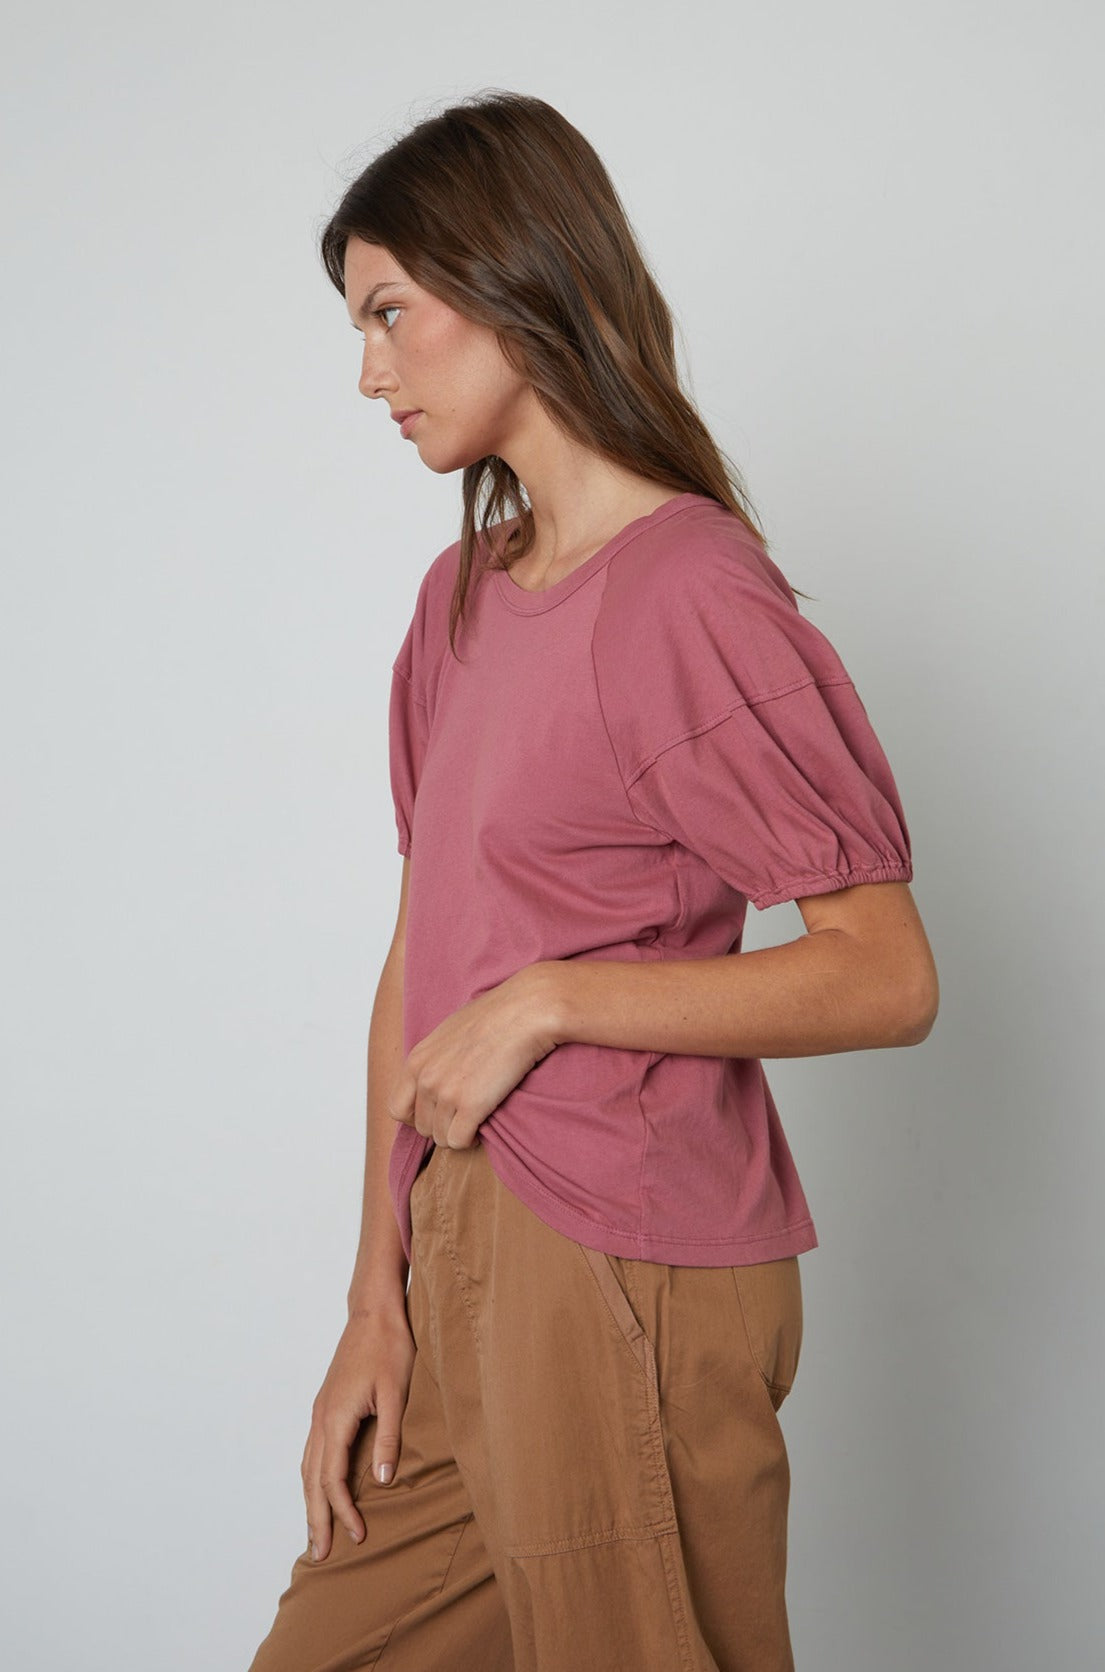   Vernice Puff Sleeve Top in Beauty with Misty pants in sepia side view 